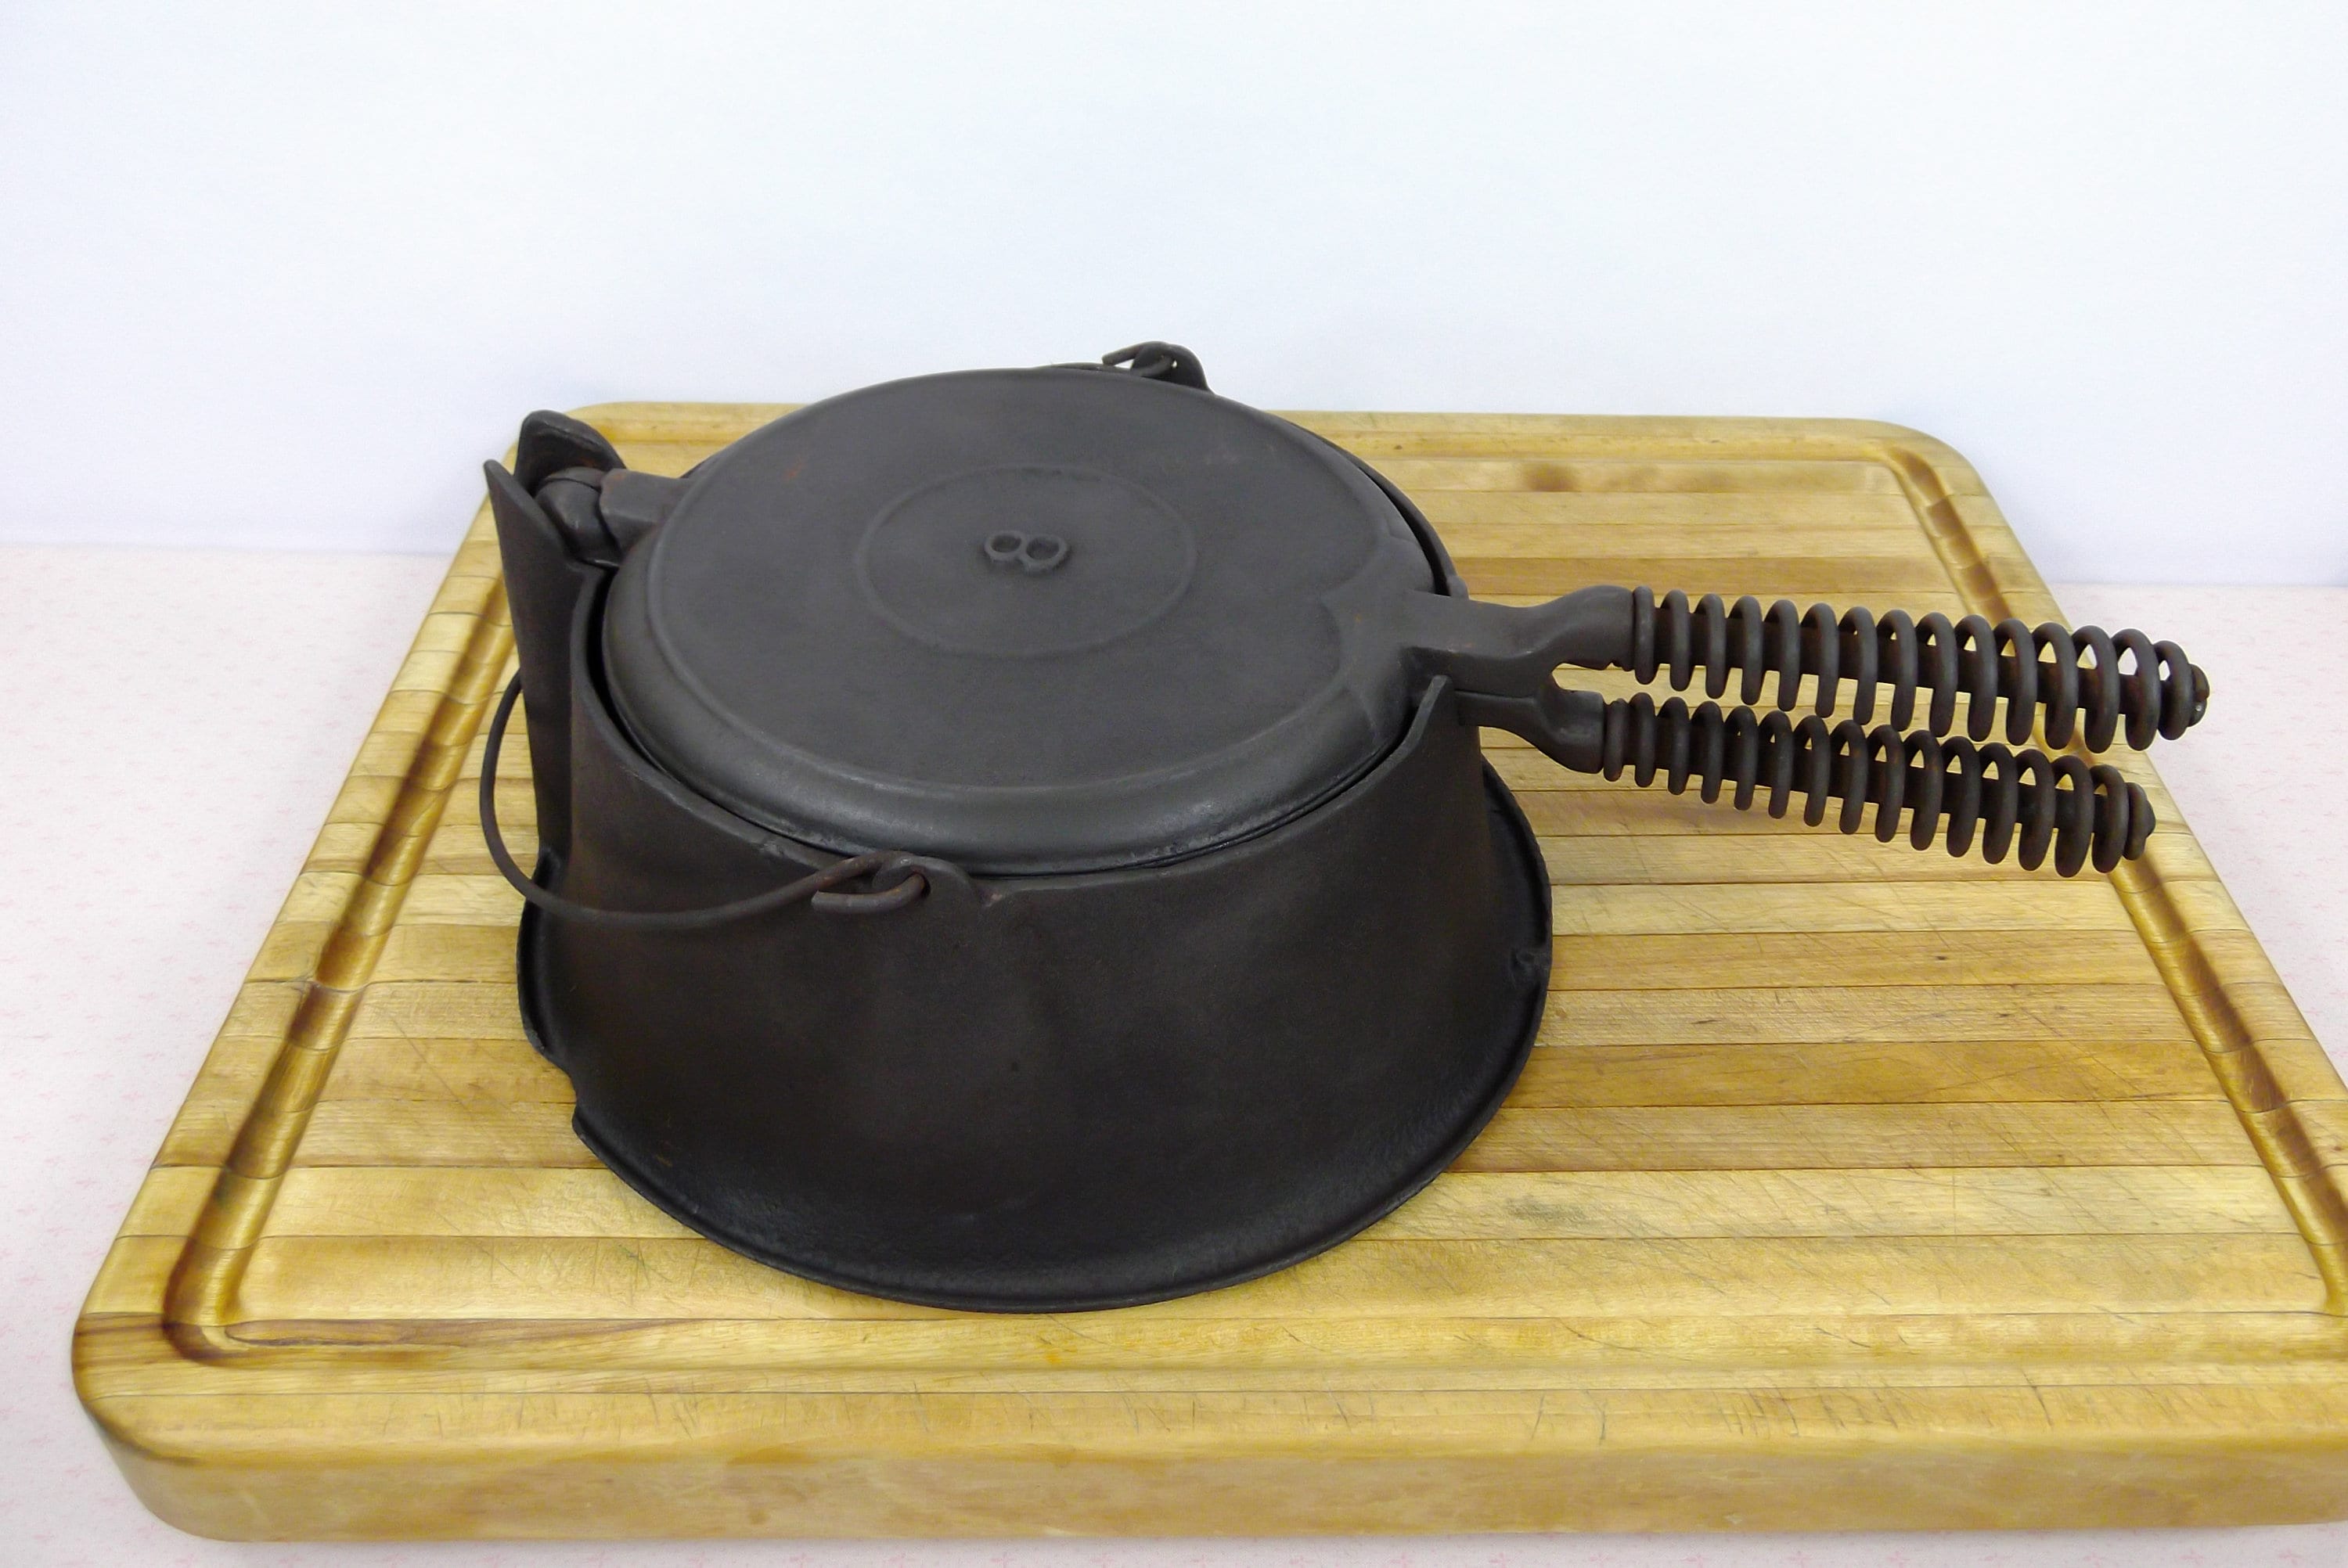 Lodge # 8, High Base, Cast Iron Waffle Iron with pin hinge and offset,  Alaskan Coil Handles. Very Good Used Condition